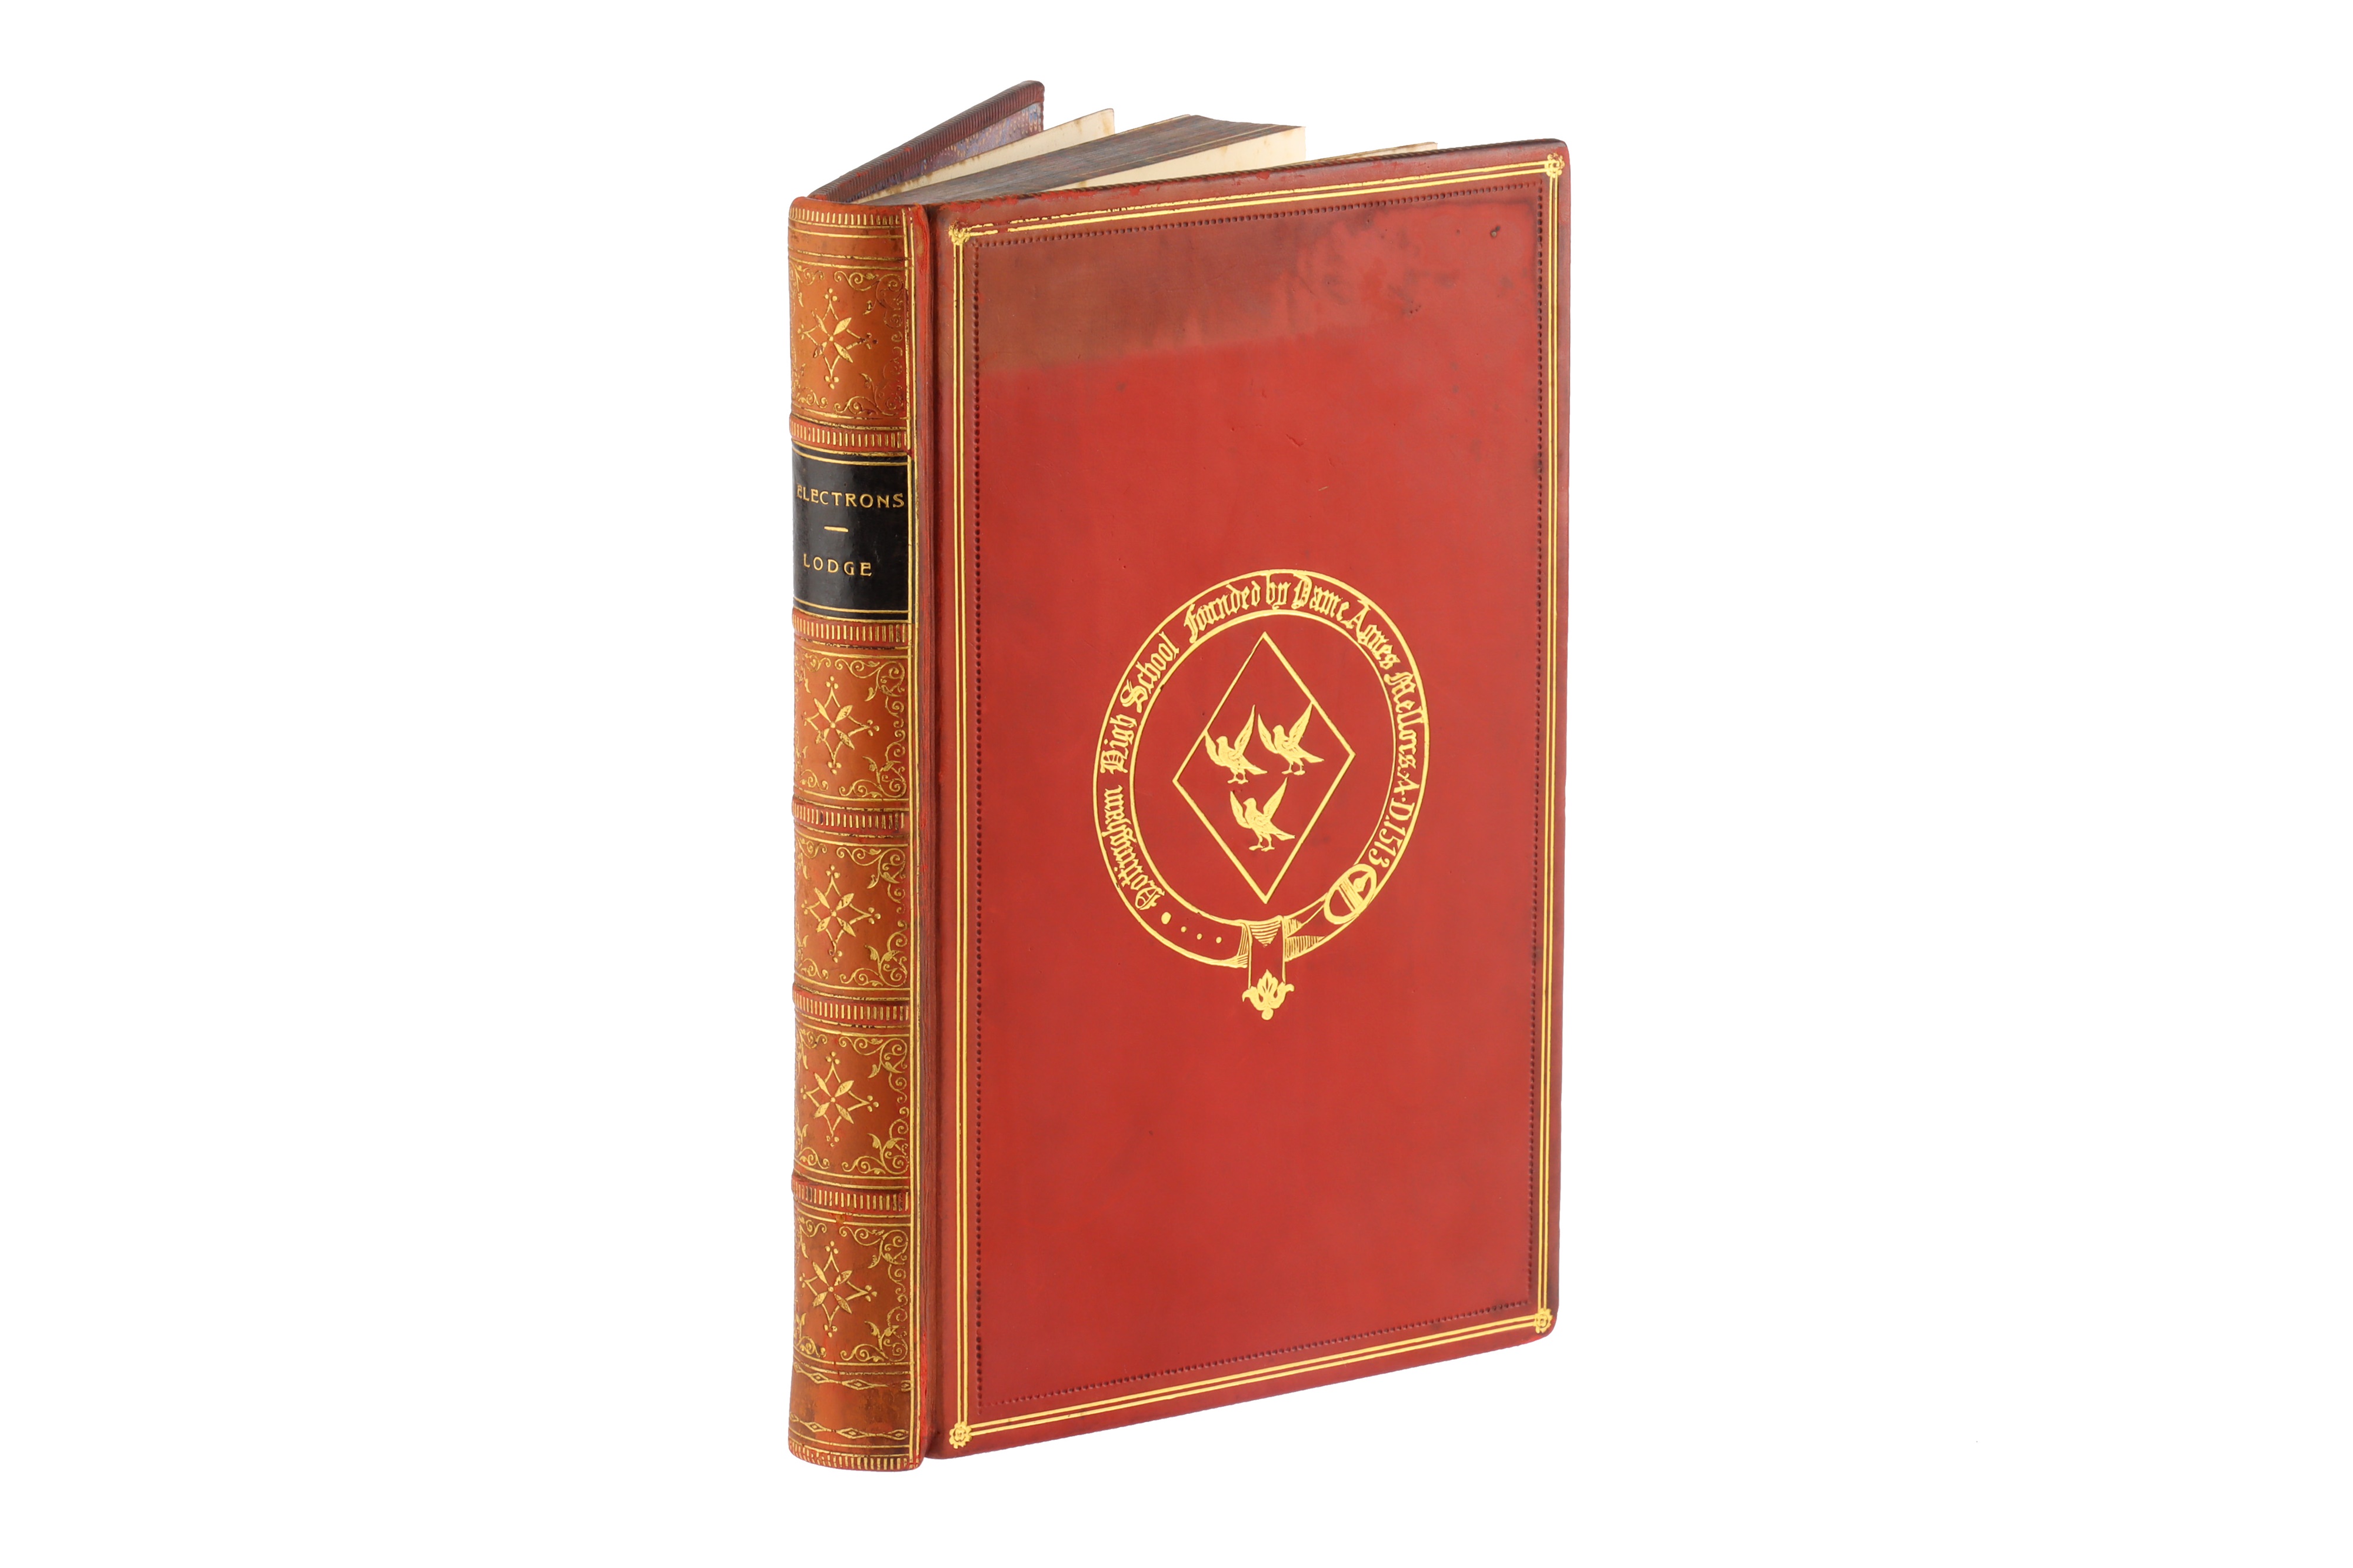 Lodge, Oliver, Electrons, Prize Binding,